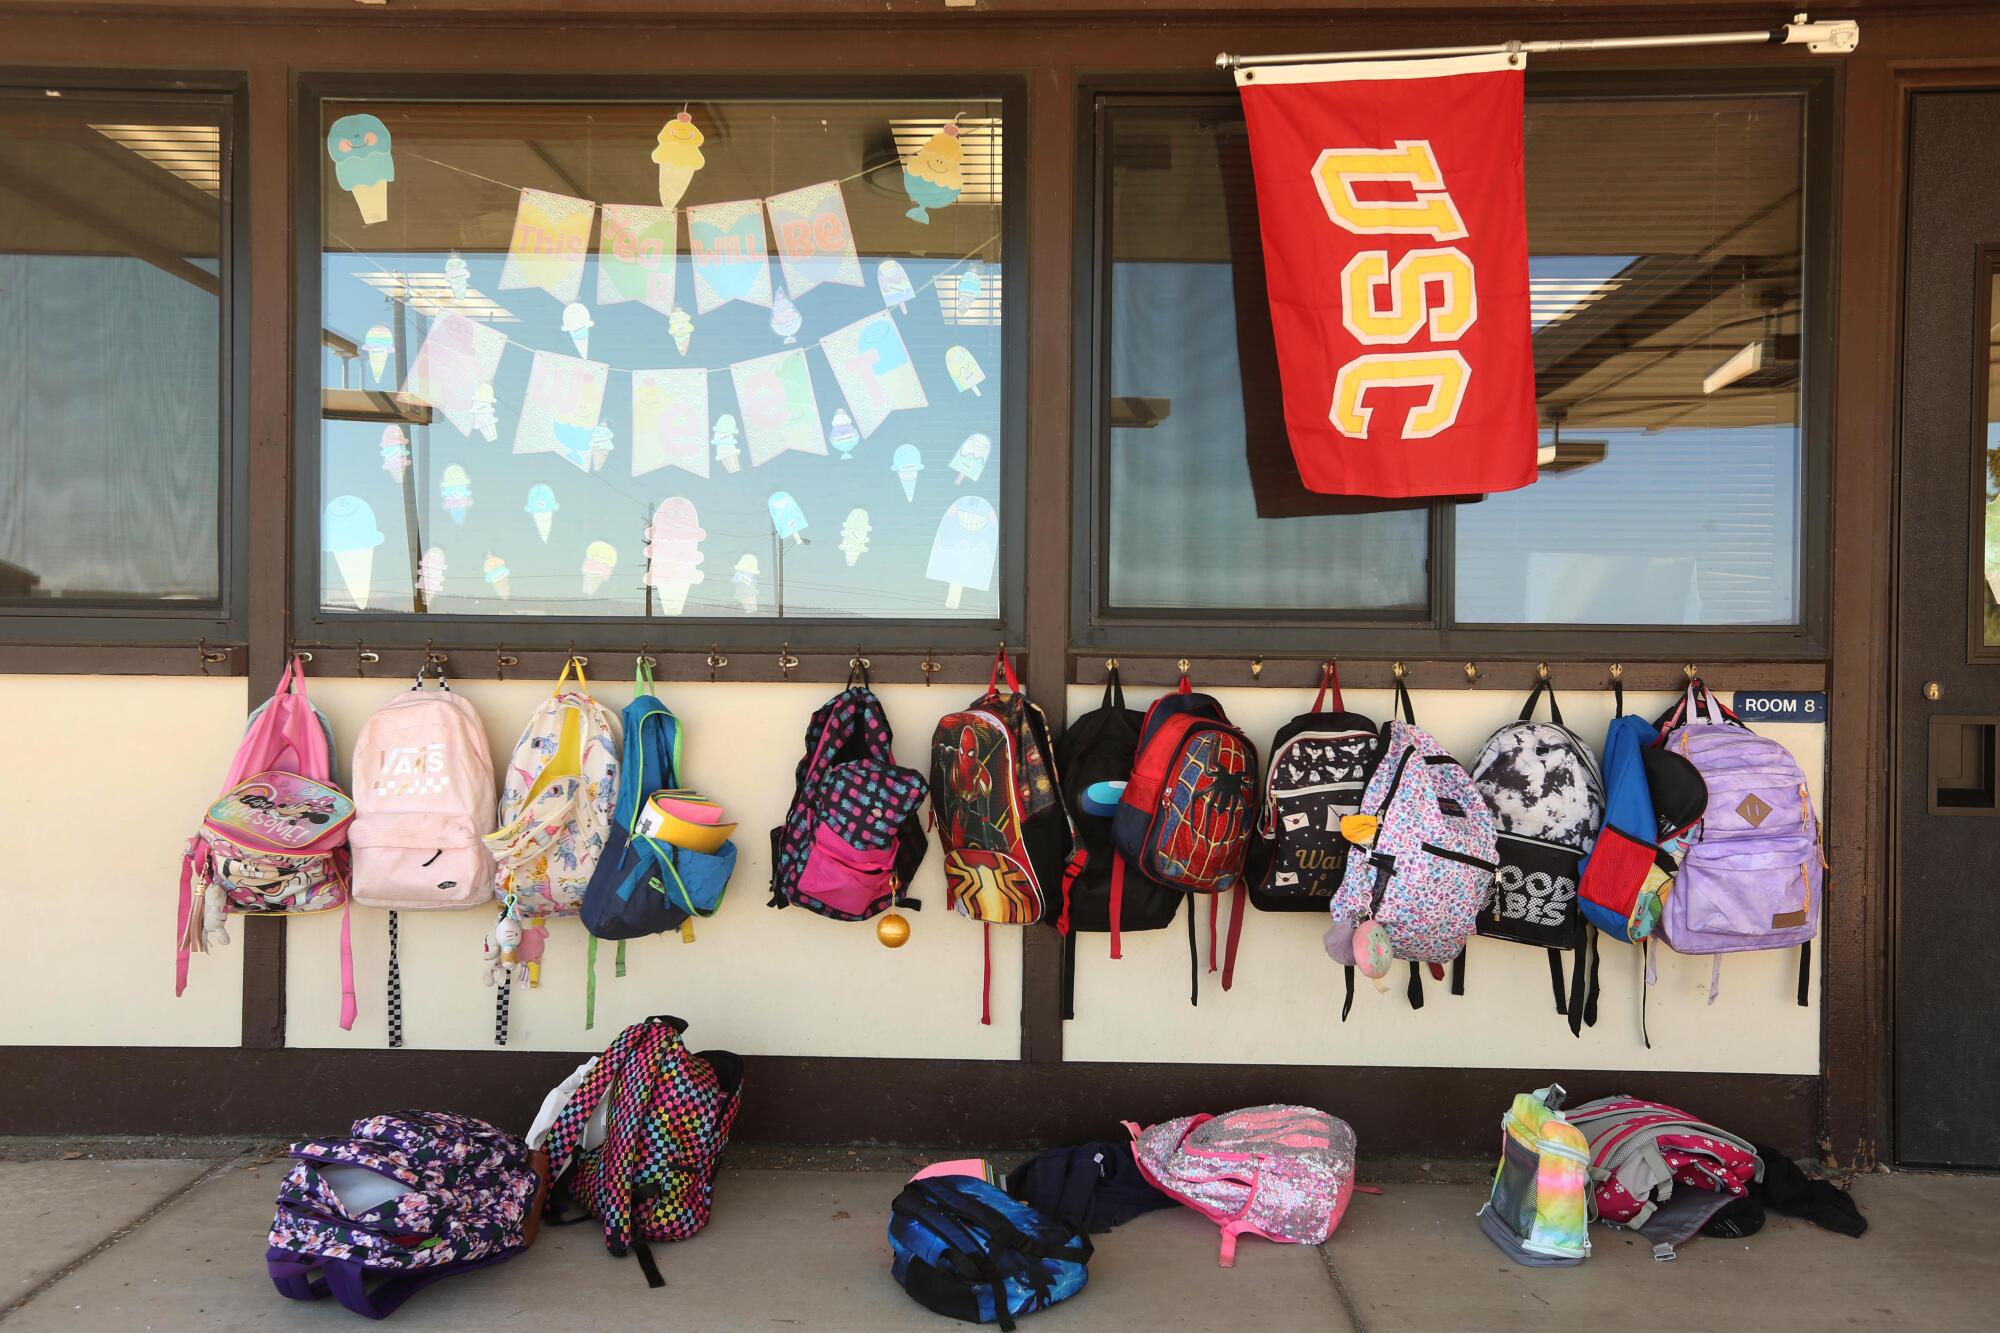 Backpacks are left hanging next to a USC banner outside a classroom at Alturas Elementary School. 